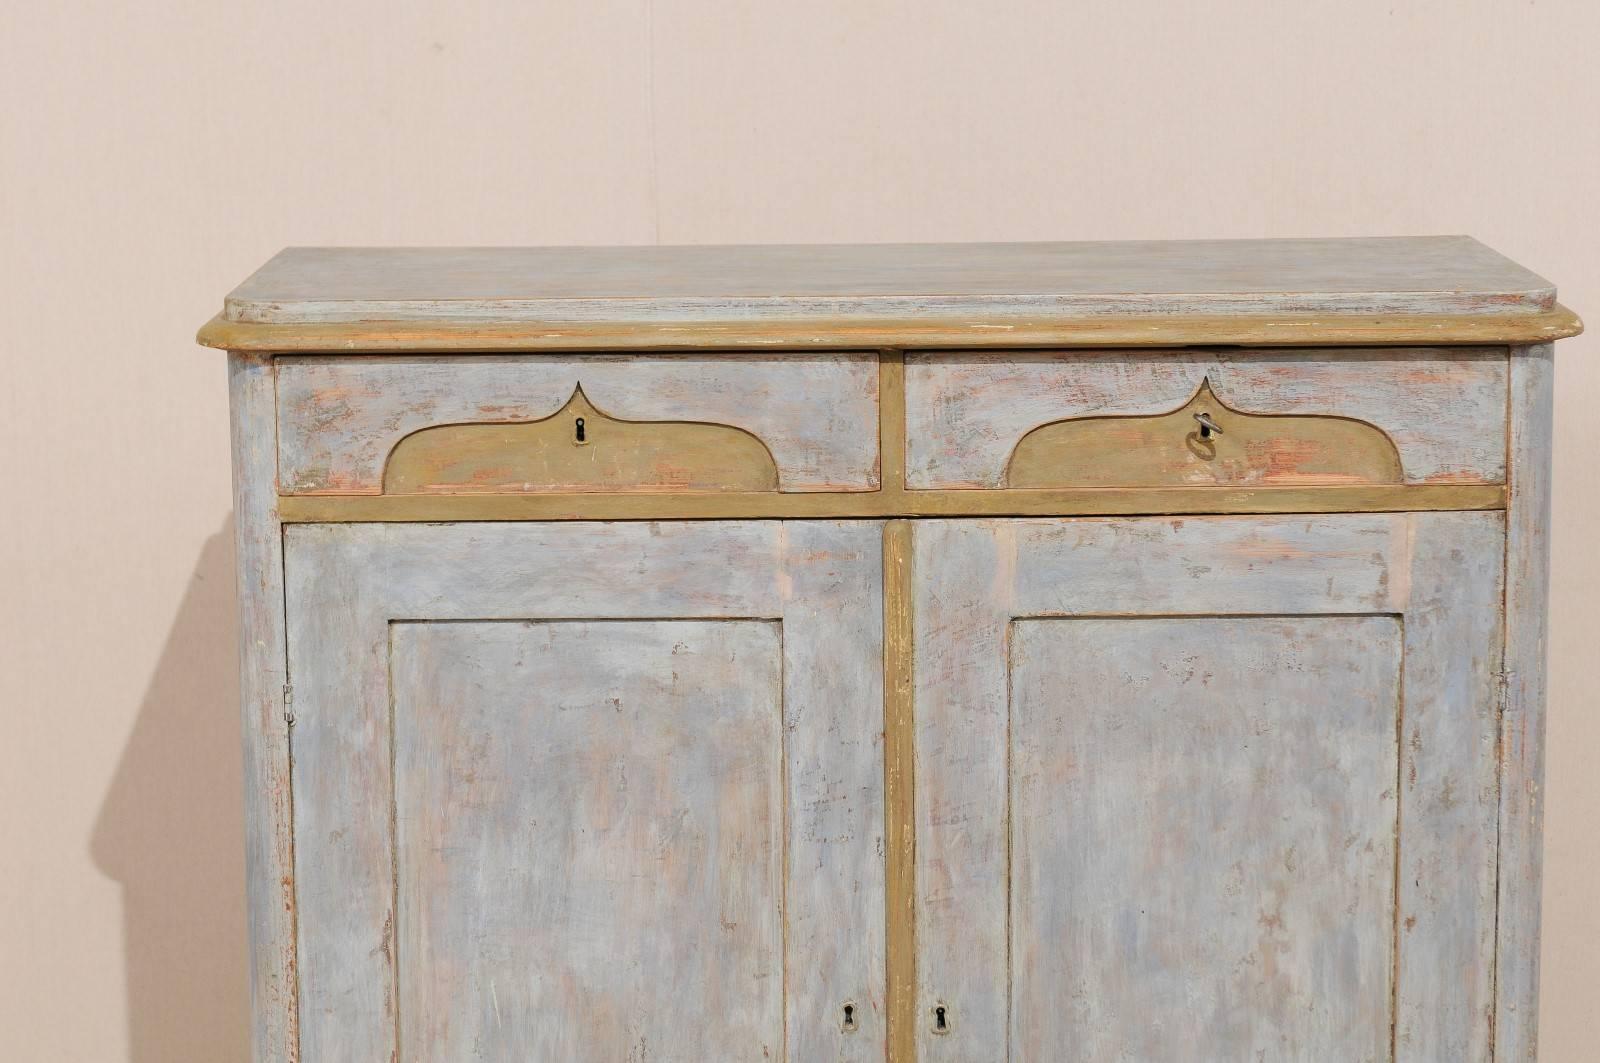 Carved 19th Century, Swedish Two-Door, Two-Drawer Painted Wood Cabinet with Ogee Motif